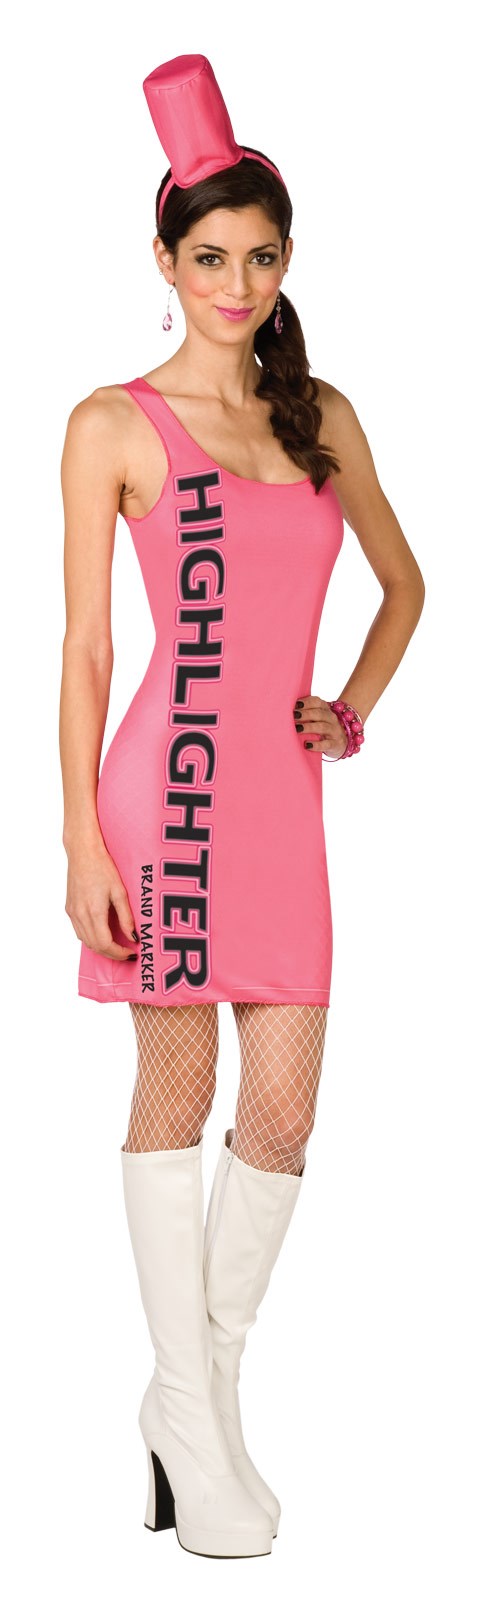 Pink Highlighter Adult Costume